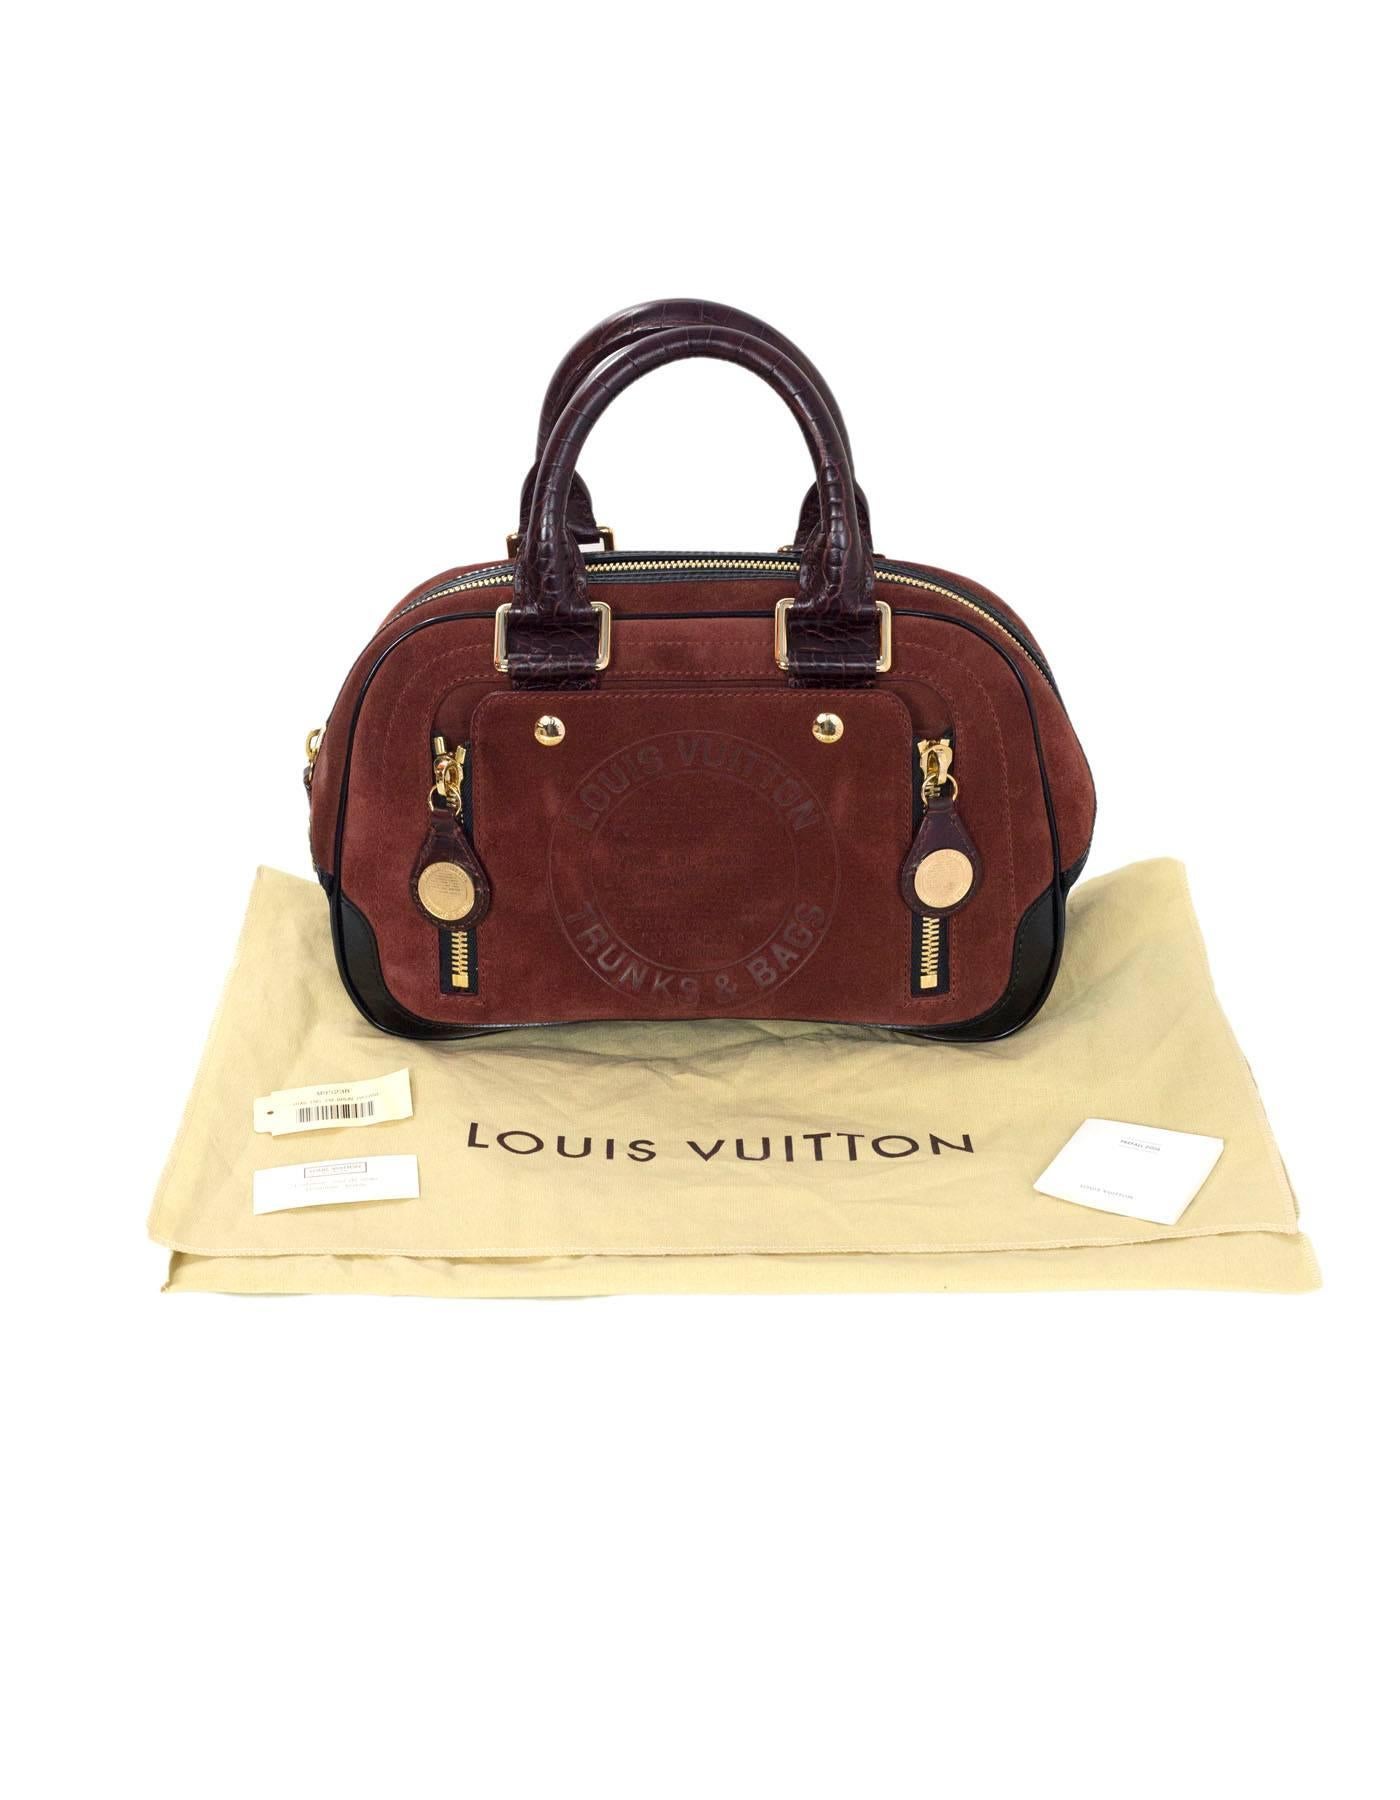 Louis Vuitton Limited Edition Rust Suede Havane Stamped Trunk PM Bowler Bag 2